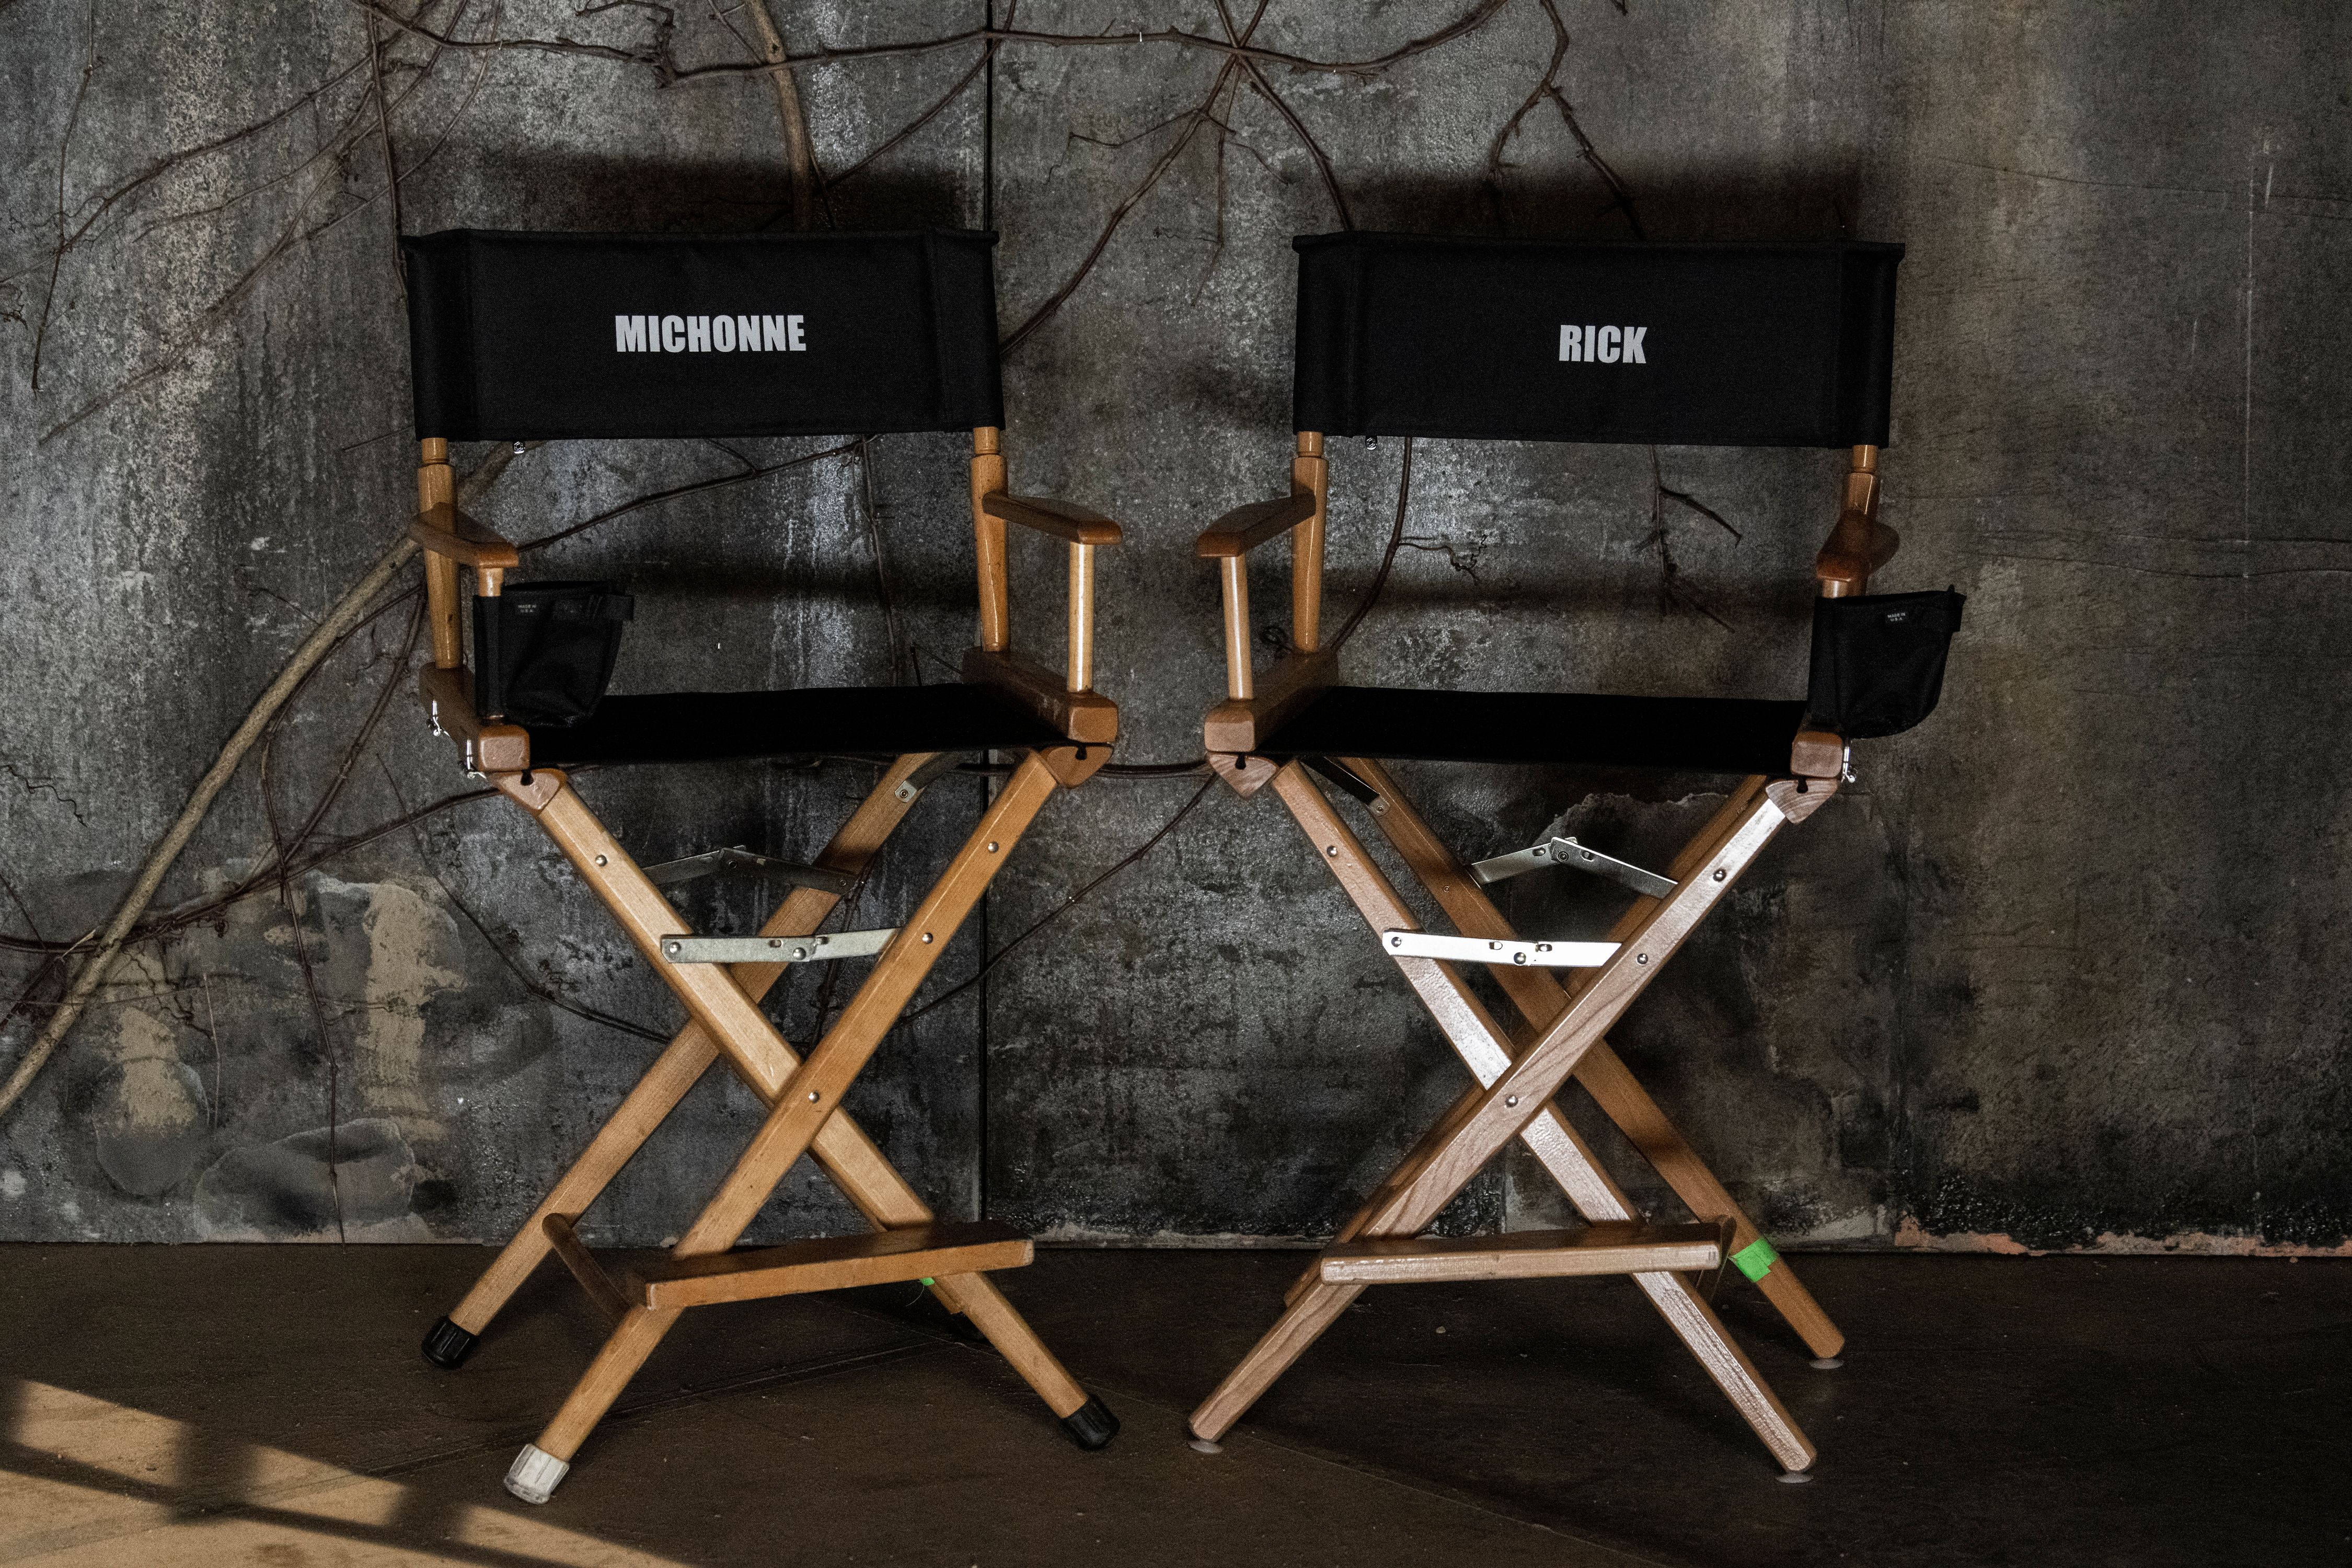 Rick and Michonne's chairs in The Walking Dead on set